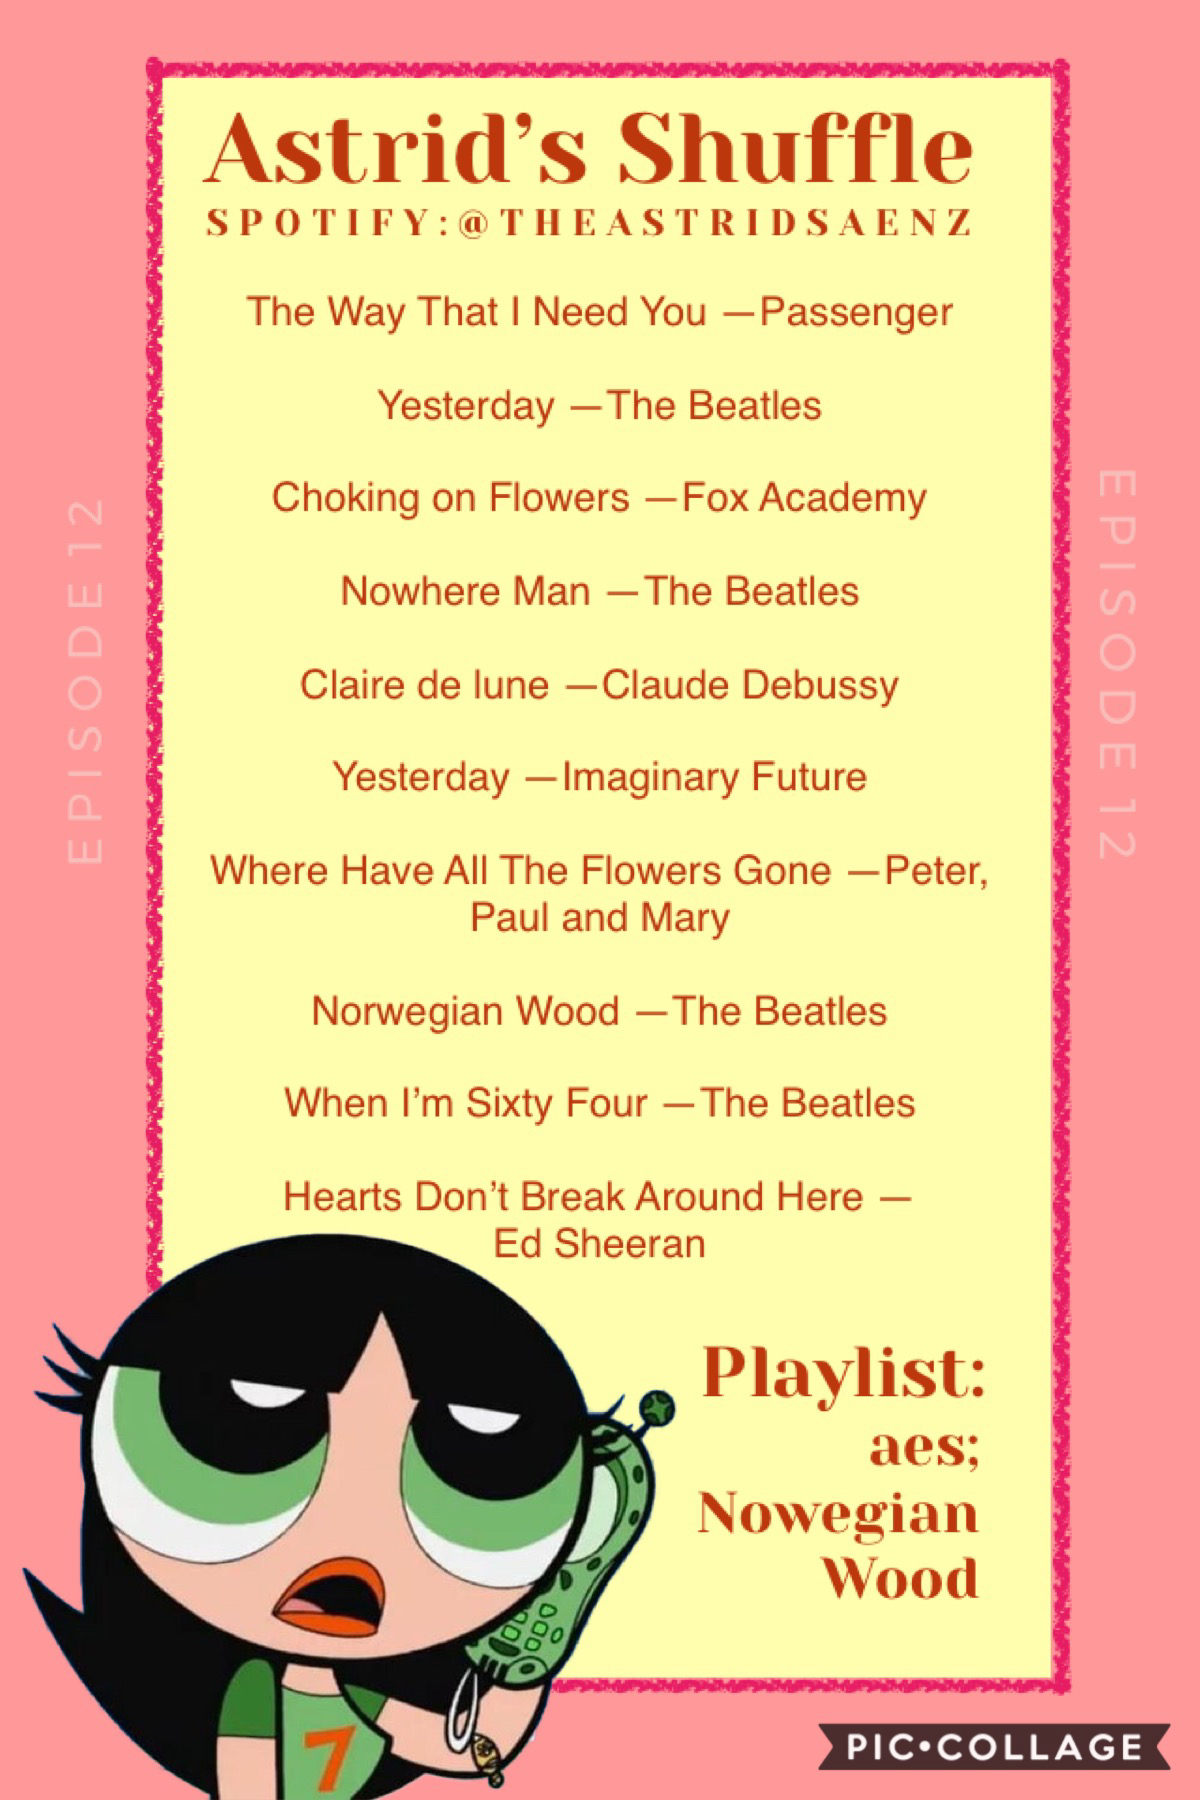 can’t believe it’s been over a year since i made one of these! 🤯😂 how many of these songs do you know? alsoo, watched “the conjuring” with gabriel last night and while annabelle wasn’t scary, that one... 😳